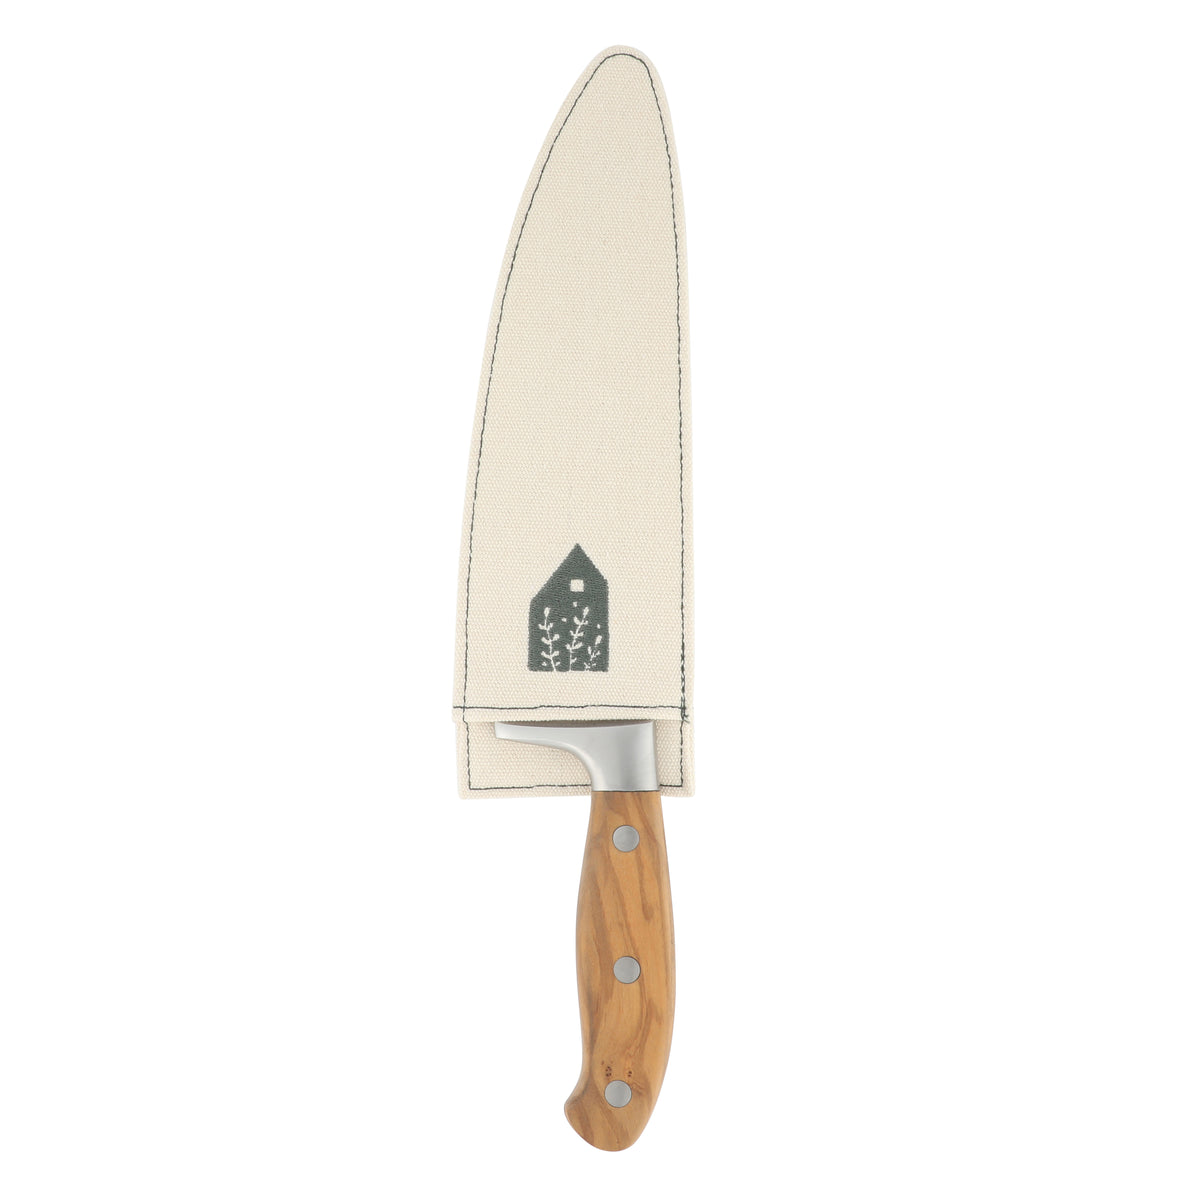 Bloomhouse 5 Inch Utility Knife made with Olive Wood and German Steel -  bloomhousecollection